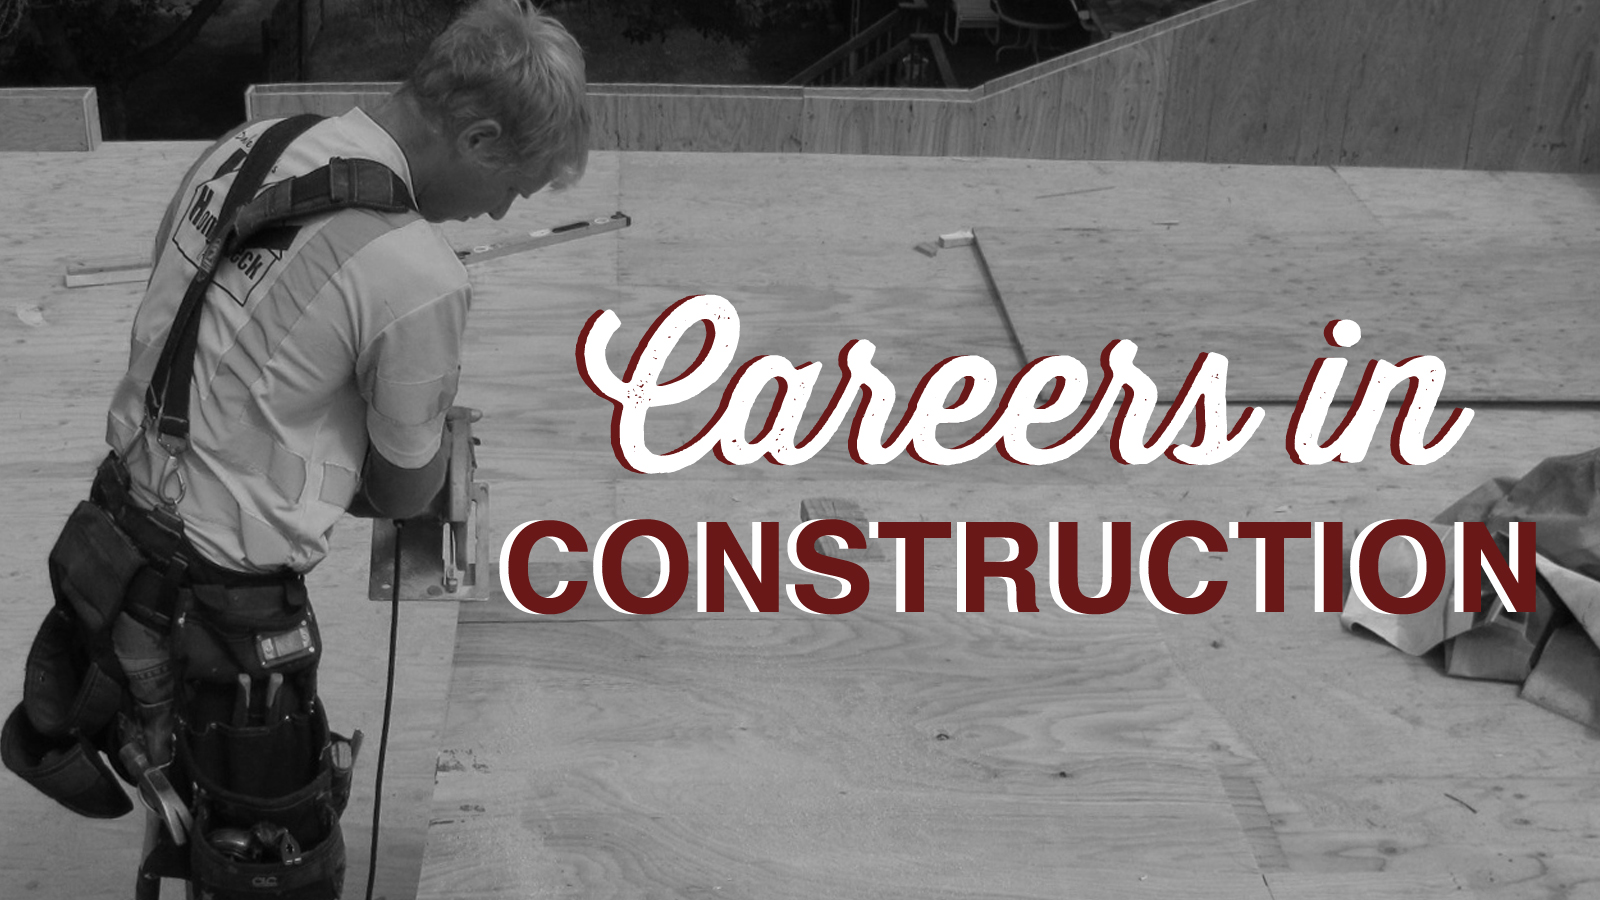 Careers In Construction